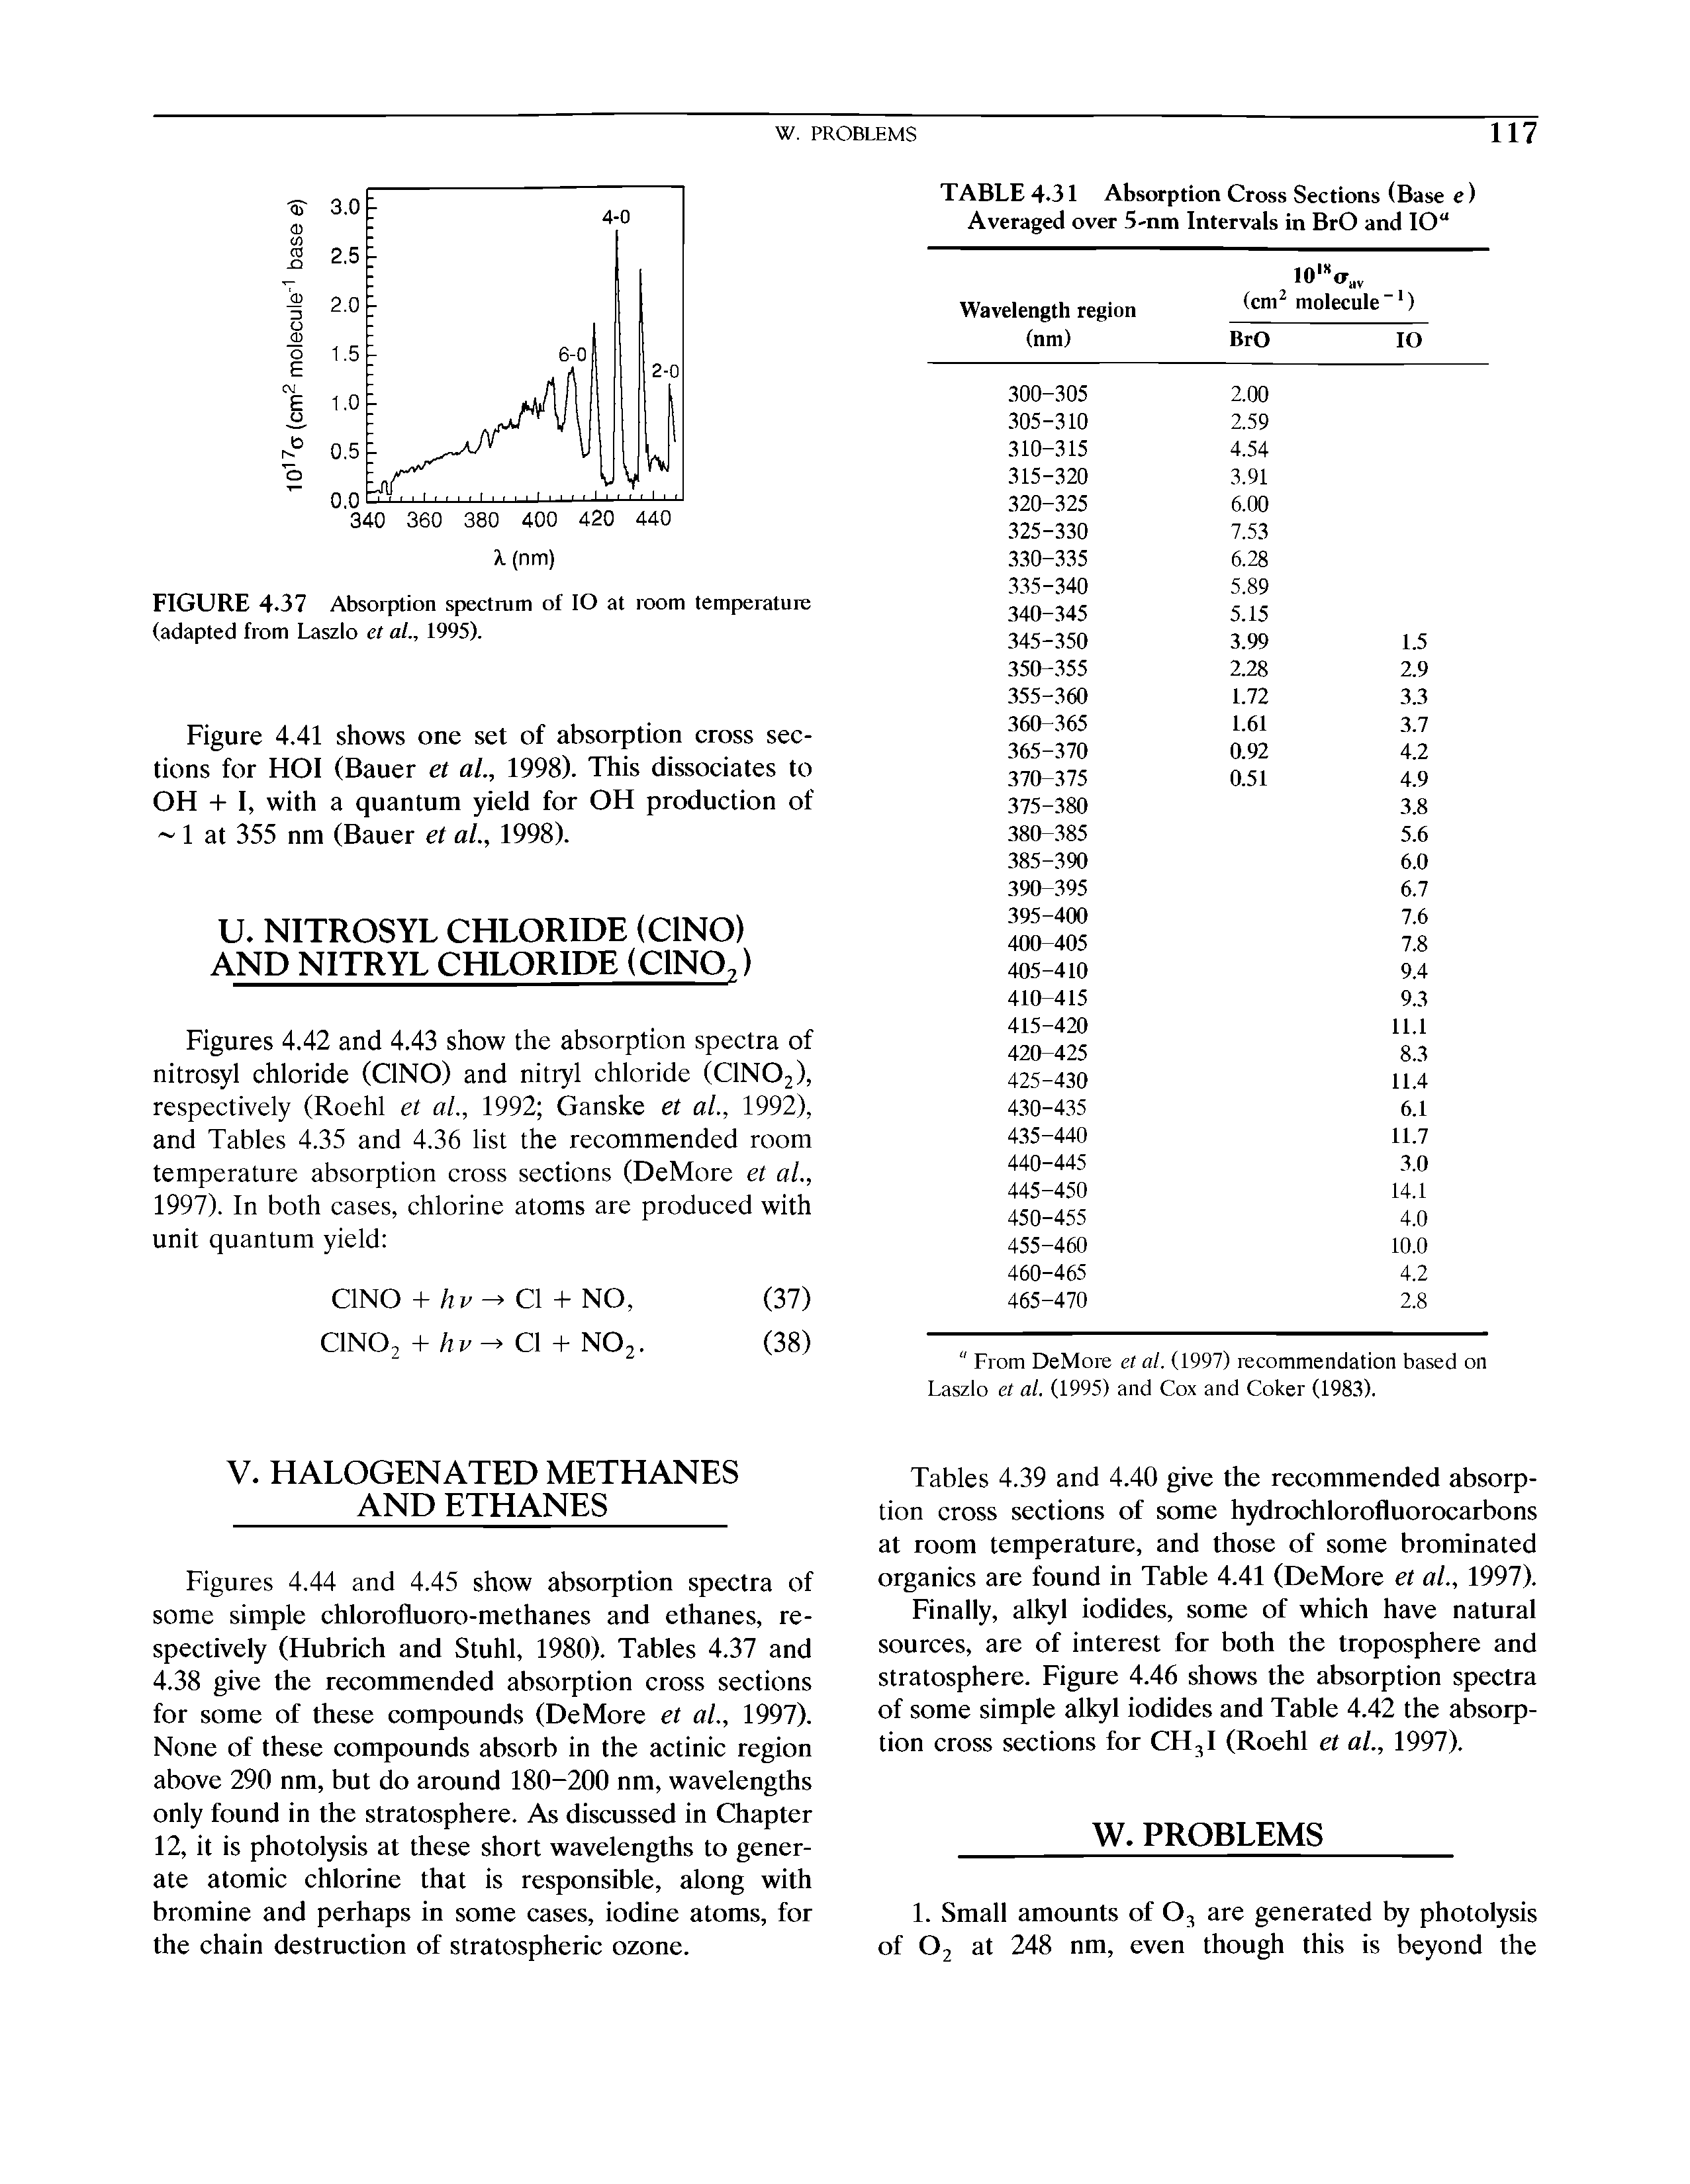 Figures 4.42 and 4.43 show the absorption spectra of nitrosyl chloride (C1NO) and nitryl chloride (C1N02), respectively (Roehl et al., 1992 Ganske et al., 1992), and Tables 4.35 and 4.36 list the recommended room temperature absorption cross sections (DeMore et al., 1997). In both cases, chlorine atoms are produced with unit quantum yield ...